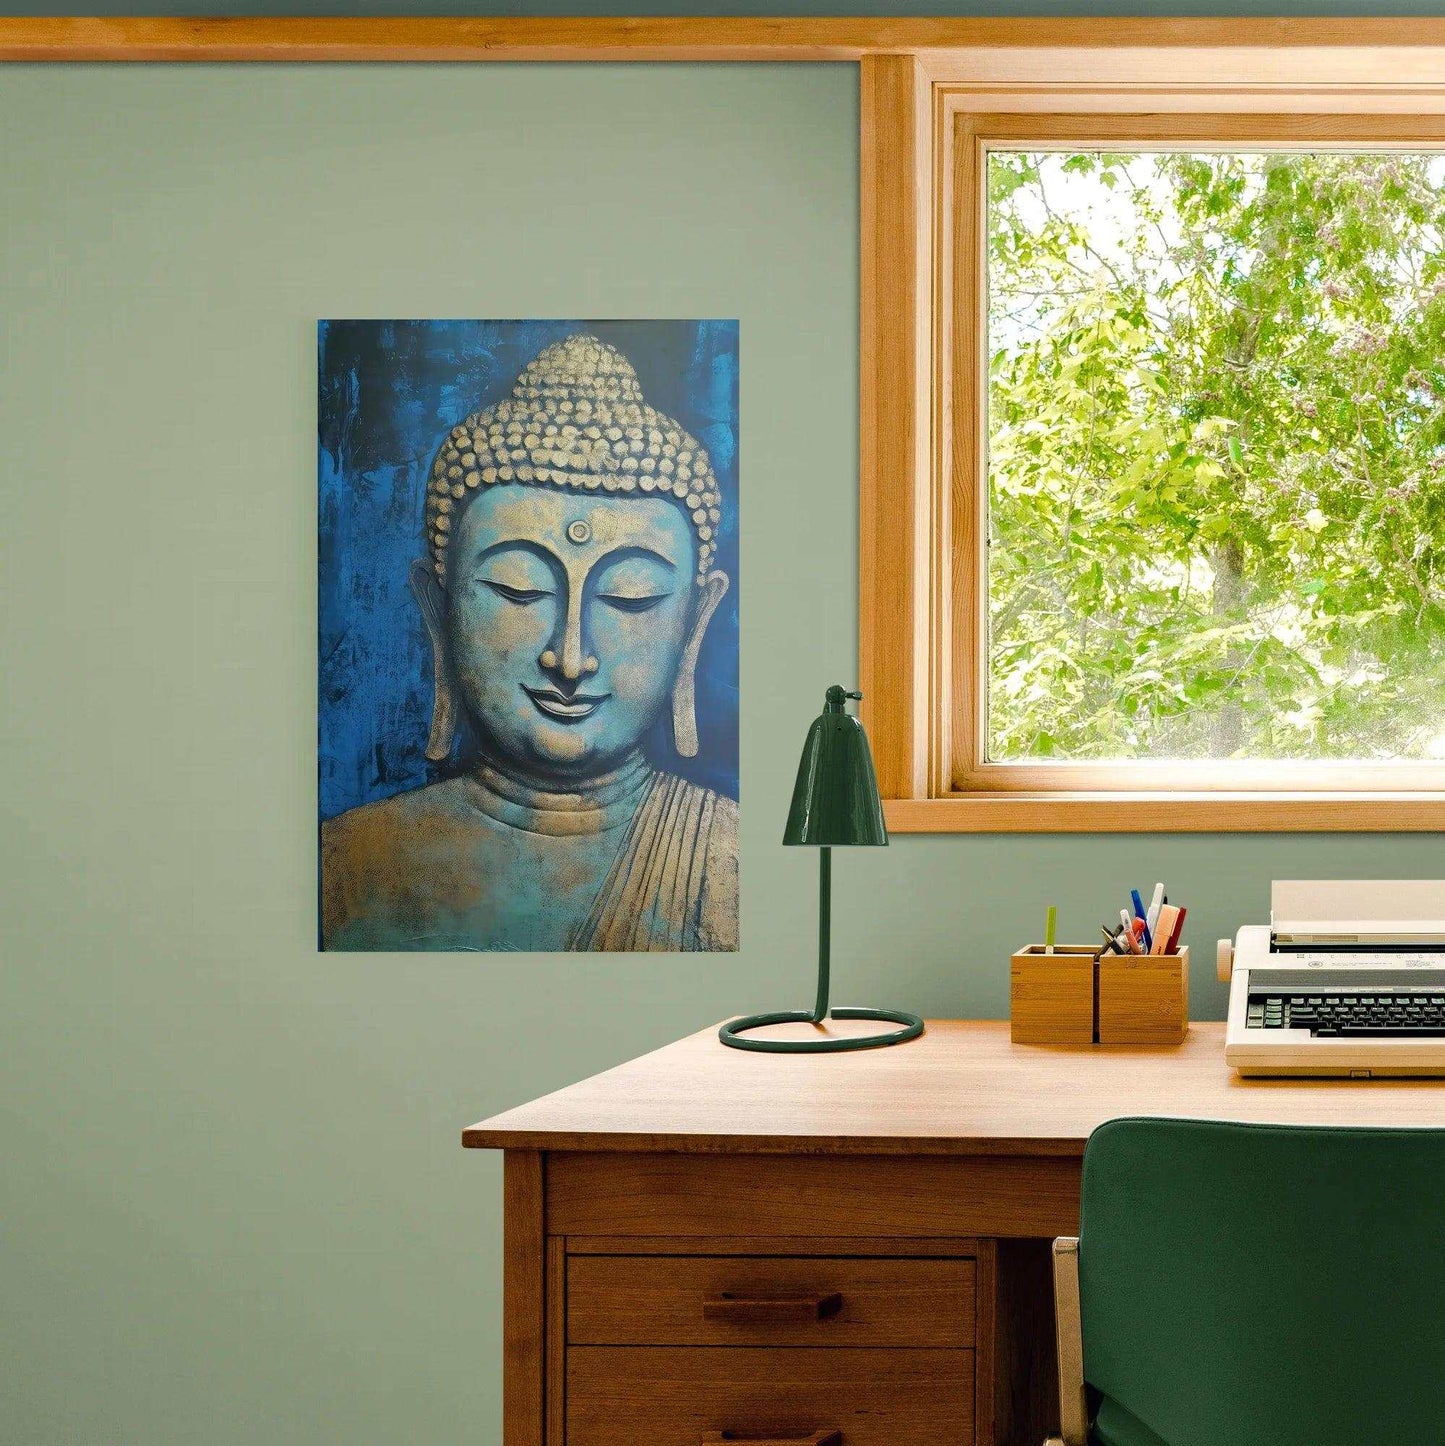 In a home office setting, a calming blue and gold Buddha painting is displayed on a mint green wall, beside a wood-framed window that looks out to lush greenery, harmonizing with the wooden furniture and green desk lamp.